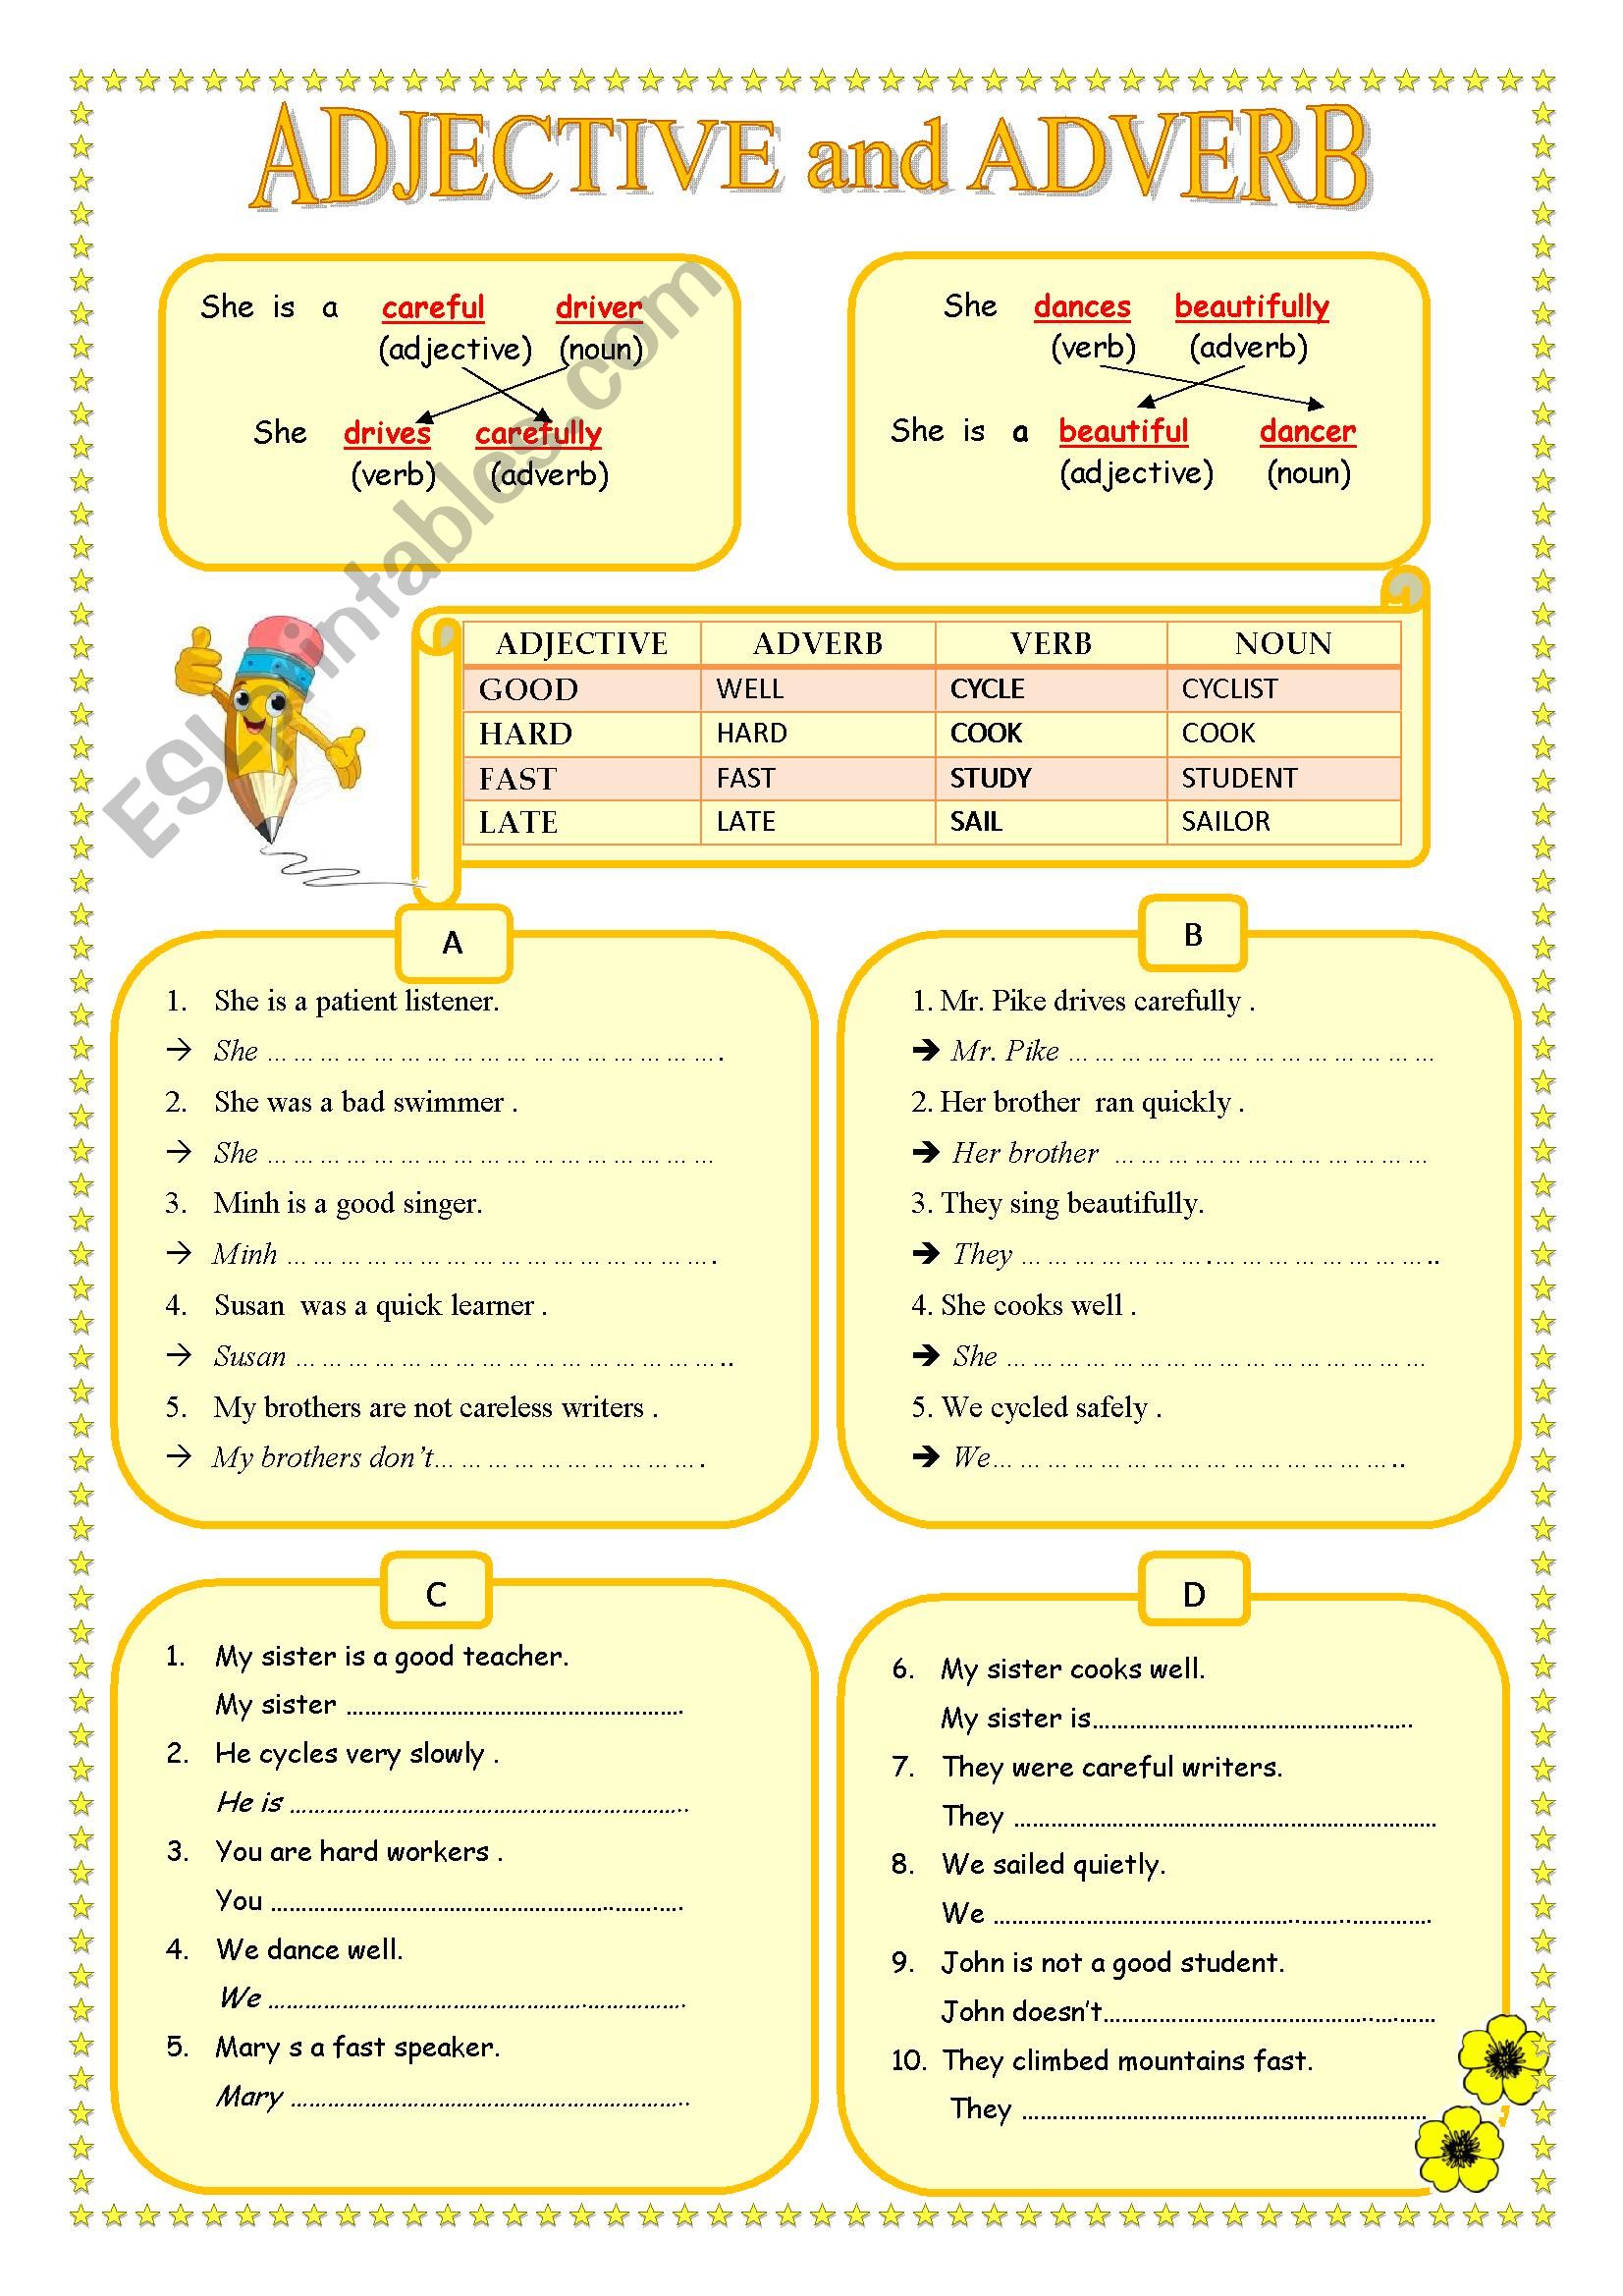 ADJECTIVE and ADVERB worksheet